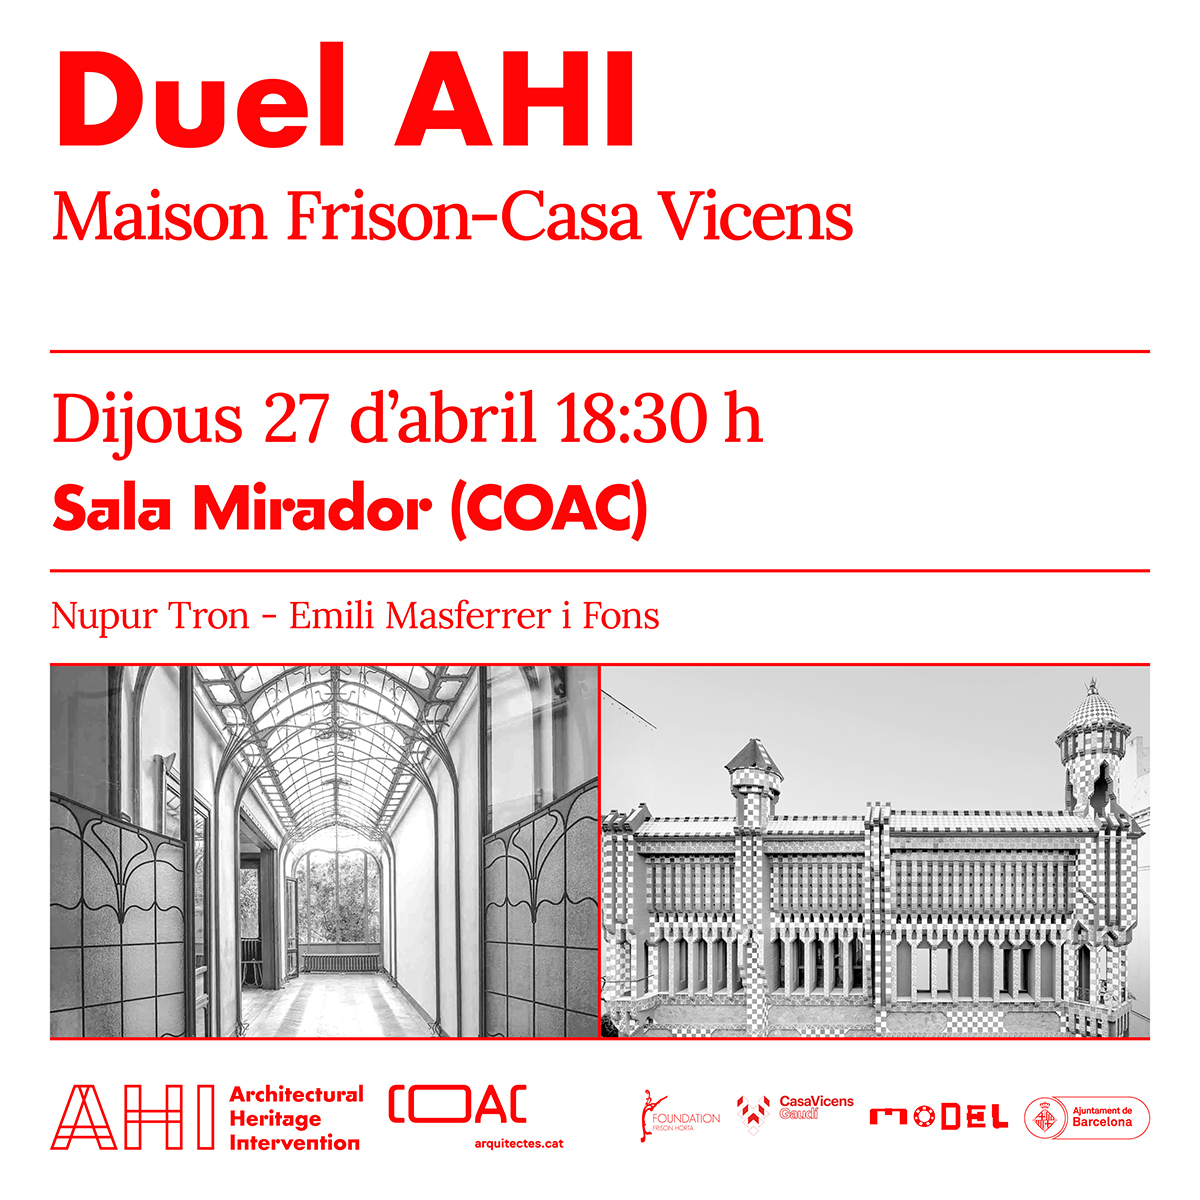 The AHI’s Duel on Architectural Heritage Intervention. Maison Frison - Casa Vicens